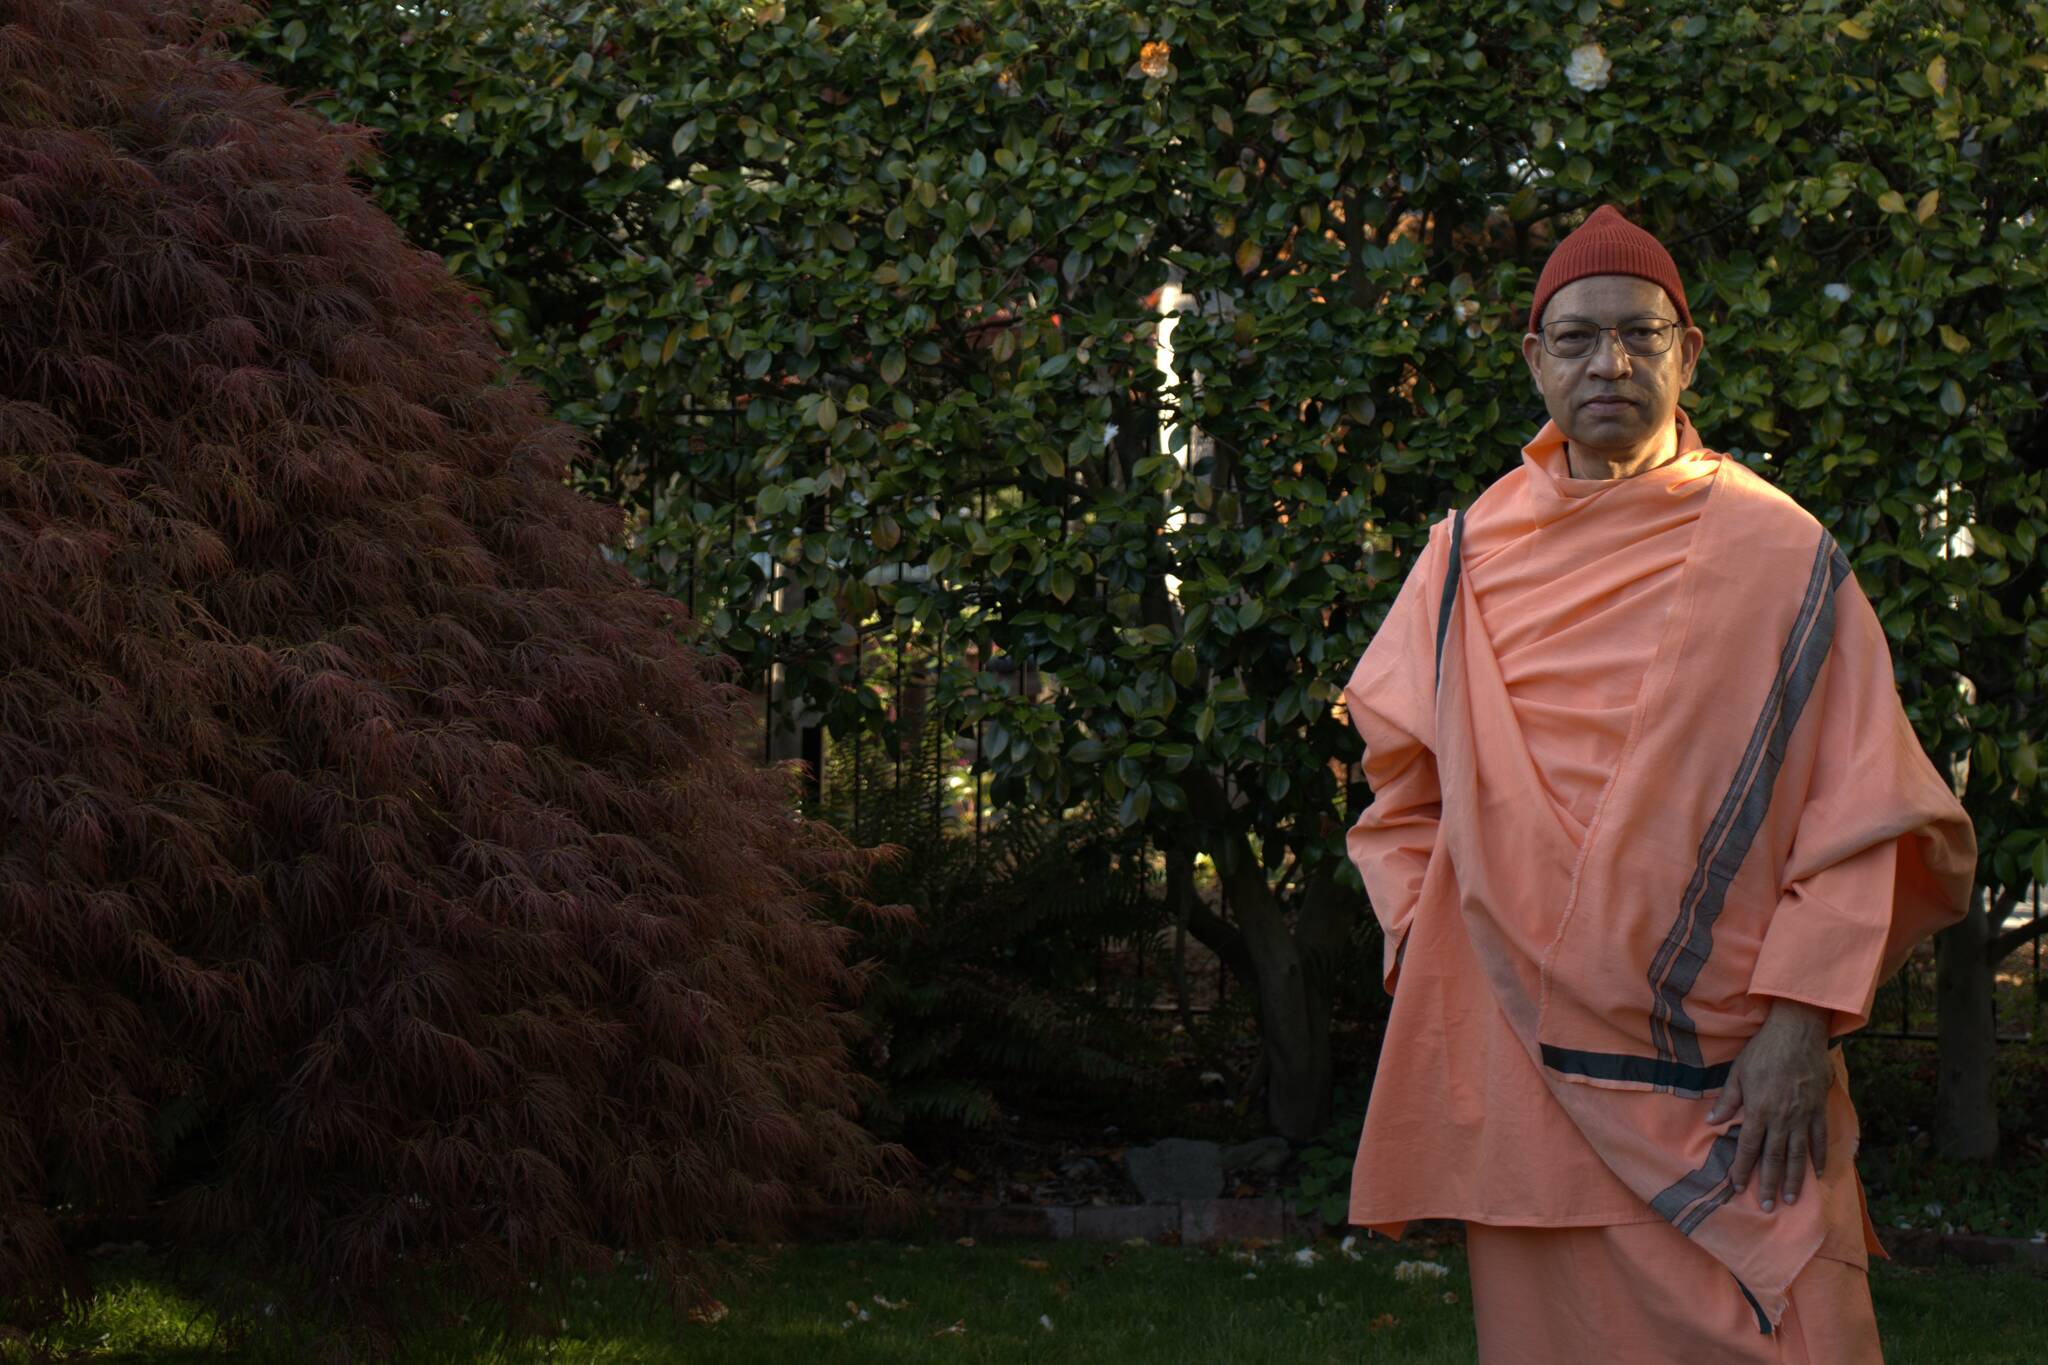 Into the mind of a Yogi: Conversation with an Indian monk